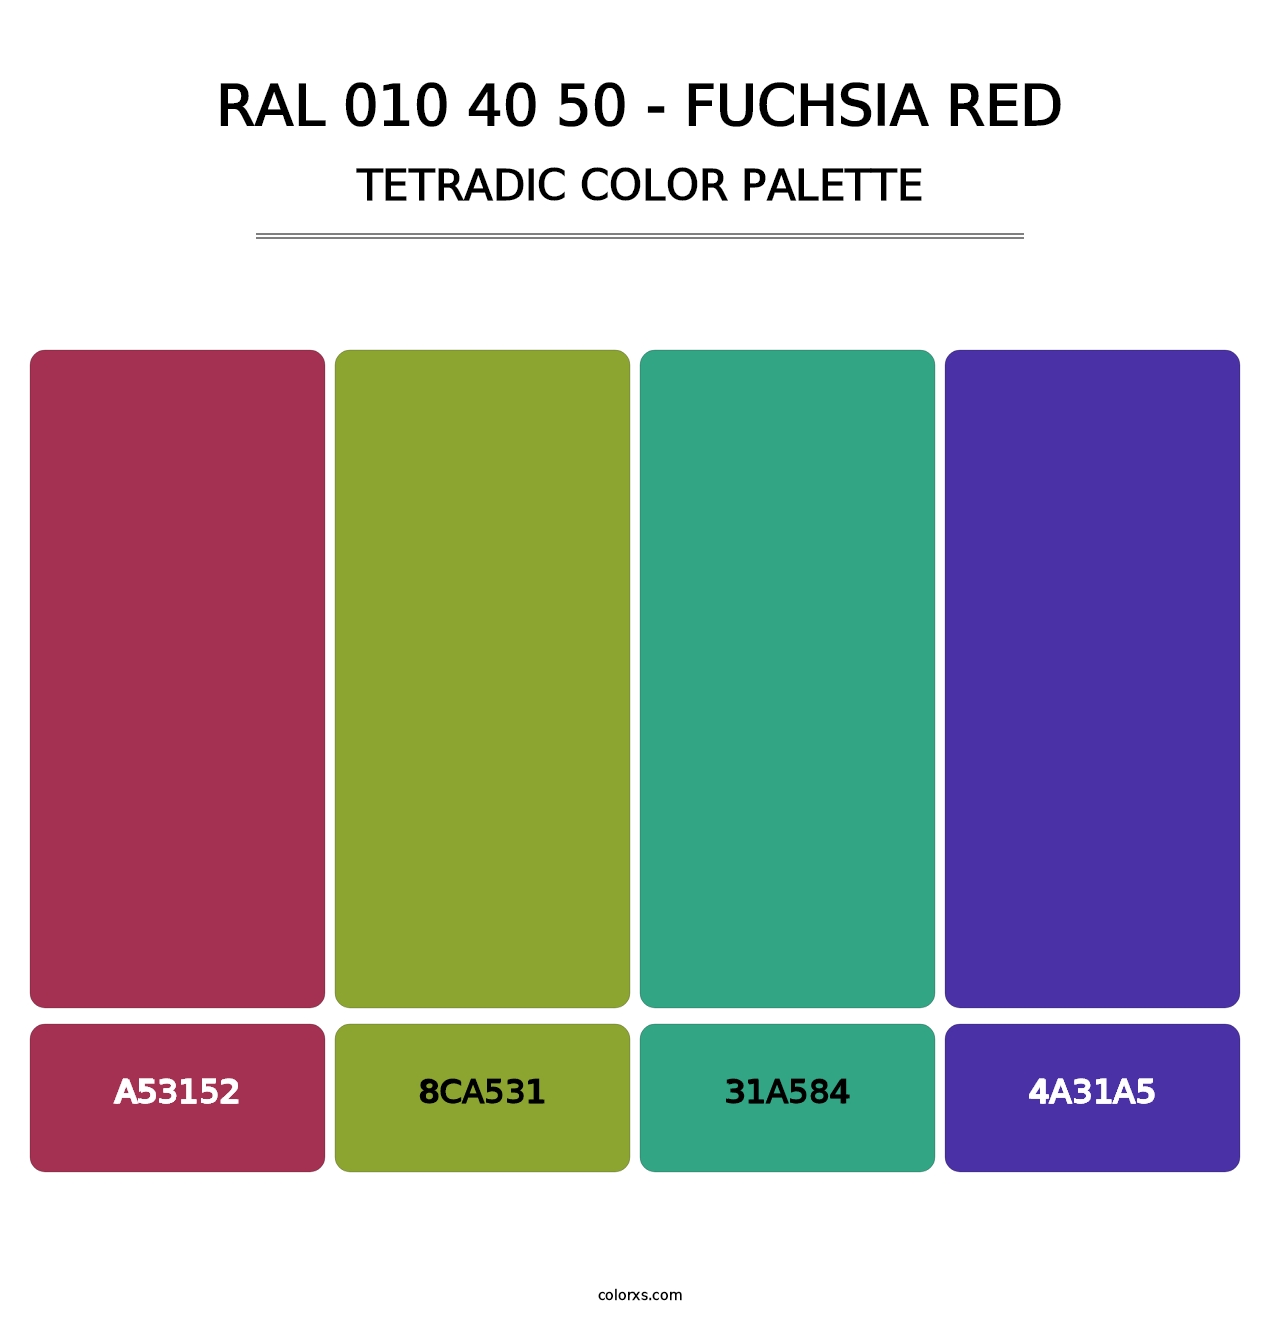 RAL 010 40 50 - Fuchsia Red - Tetradic Color Palette